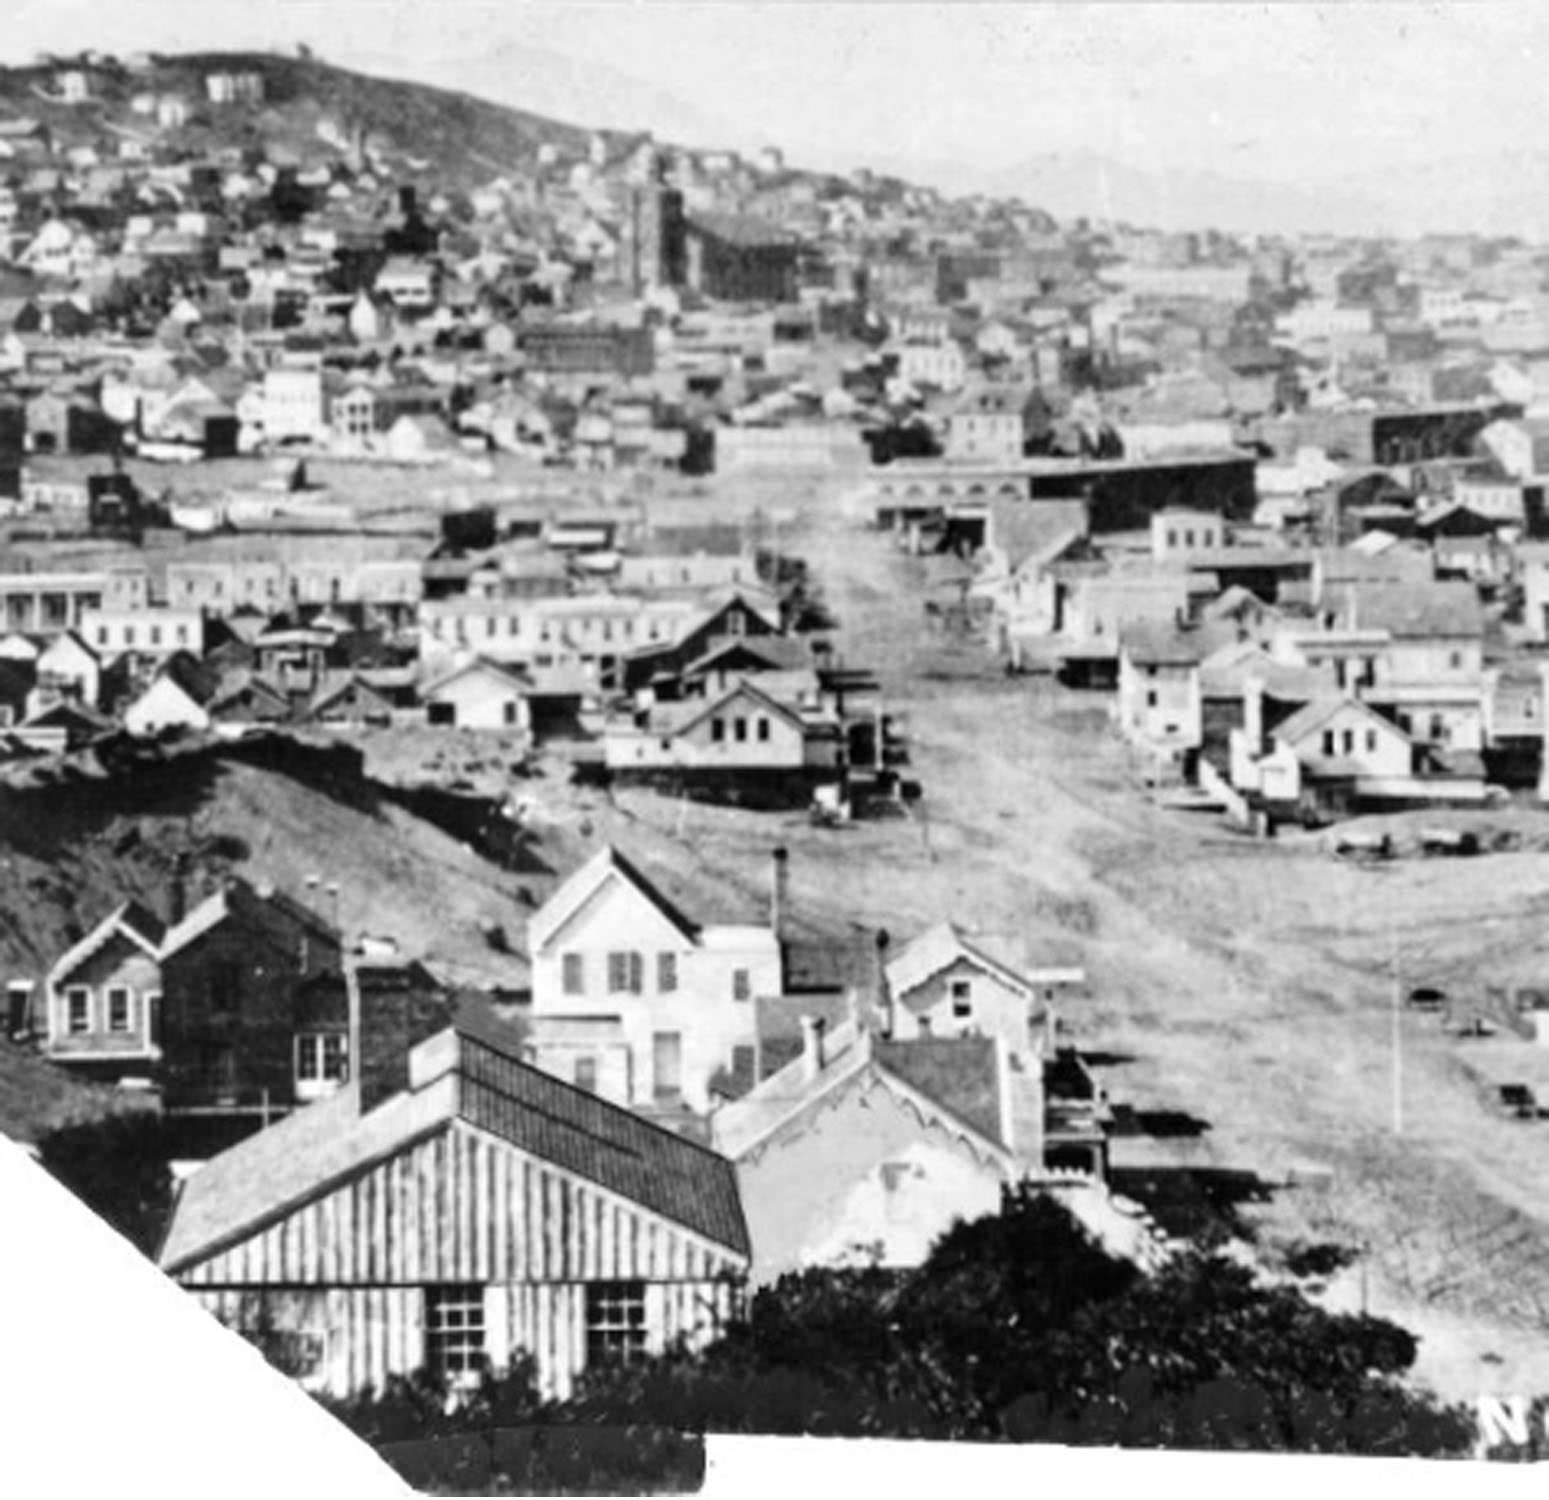 Looking north on Folsom Street from 2nd Street, 1856